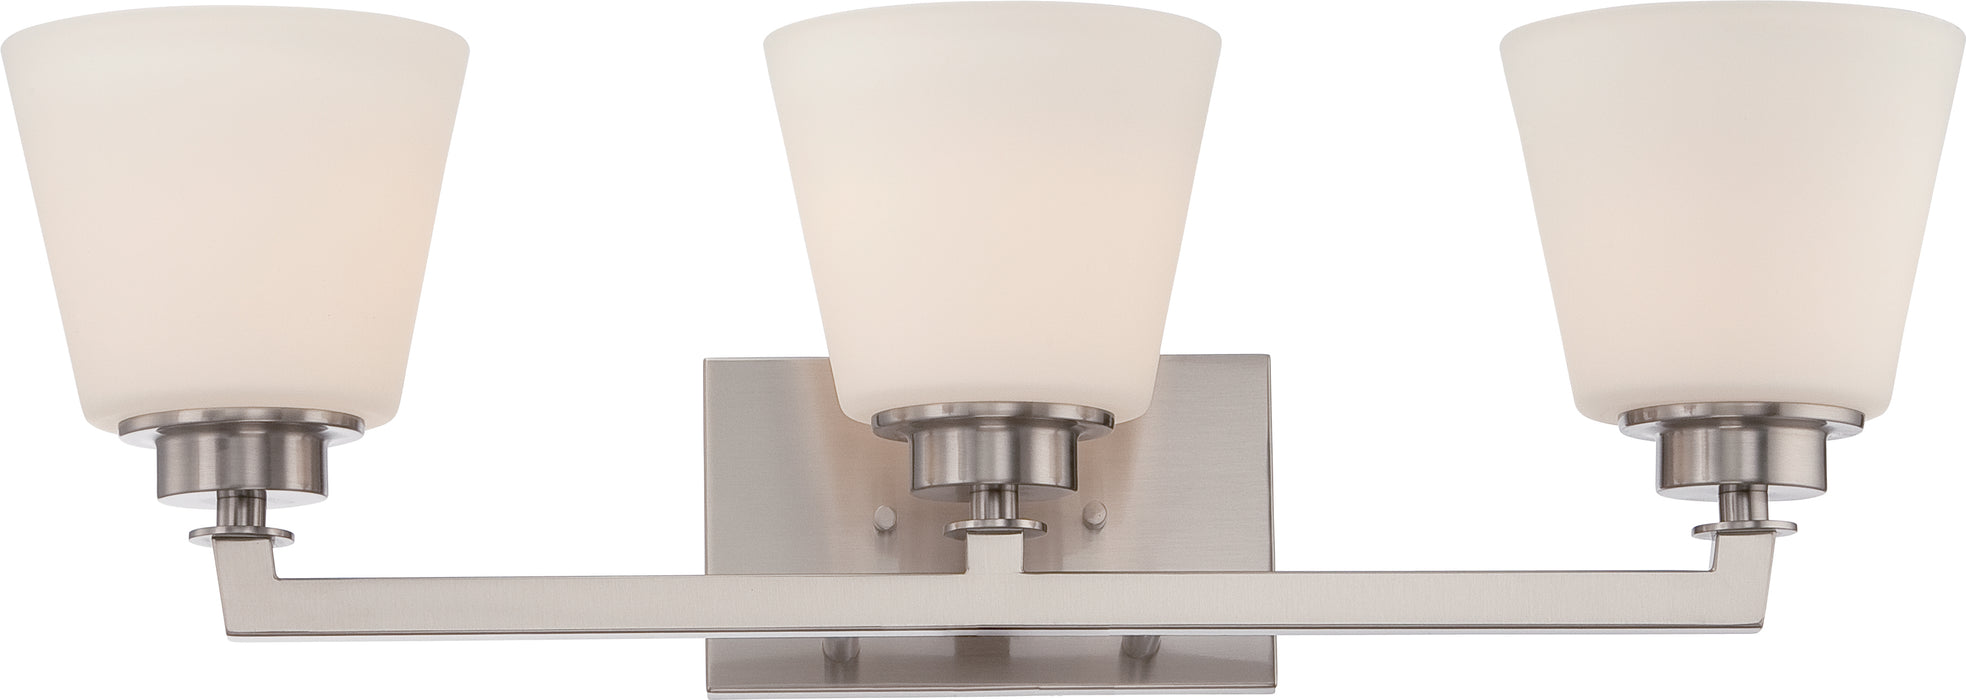 SATCO/NUVO Mobili 3-Light Vanity Fixture With Satin White Glass (60-5453)